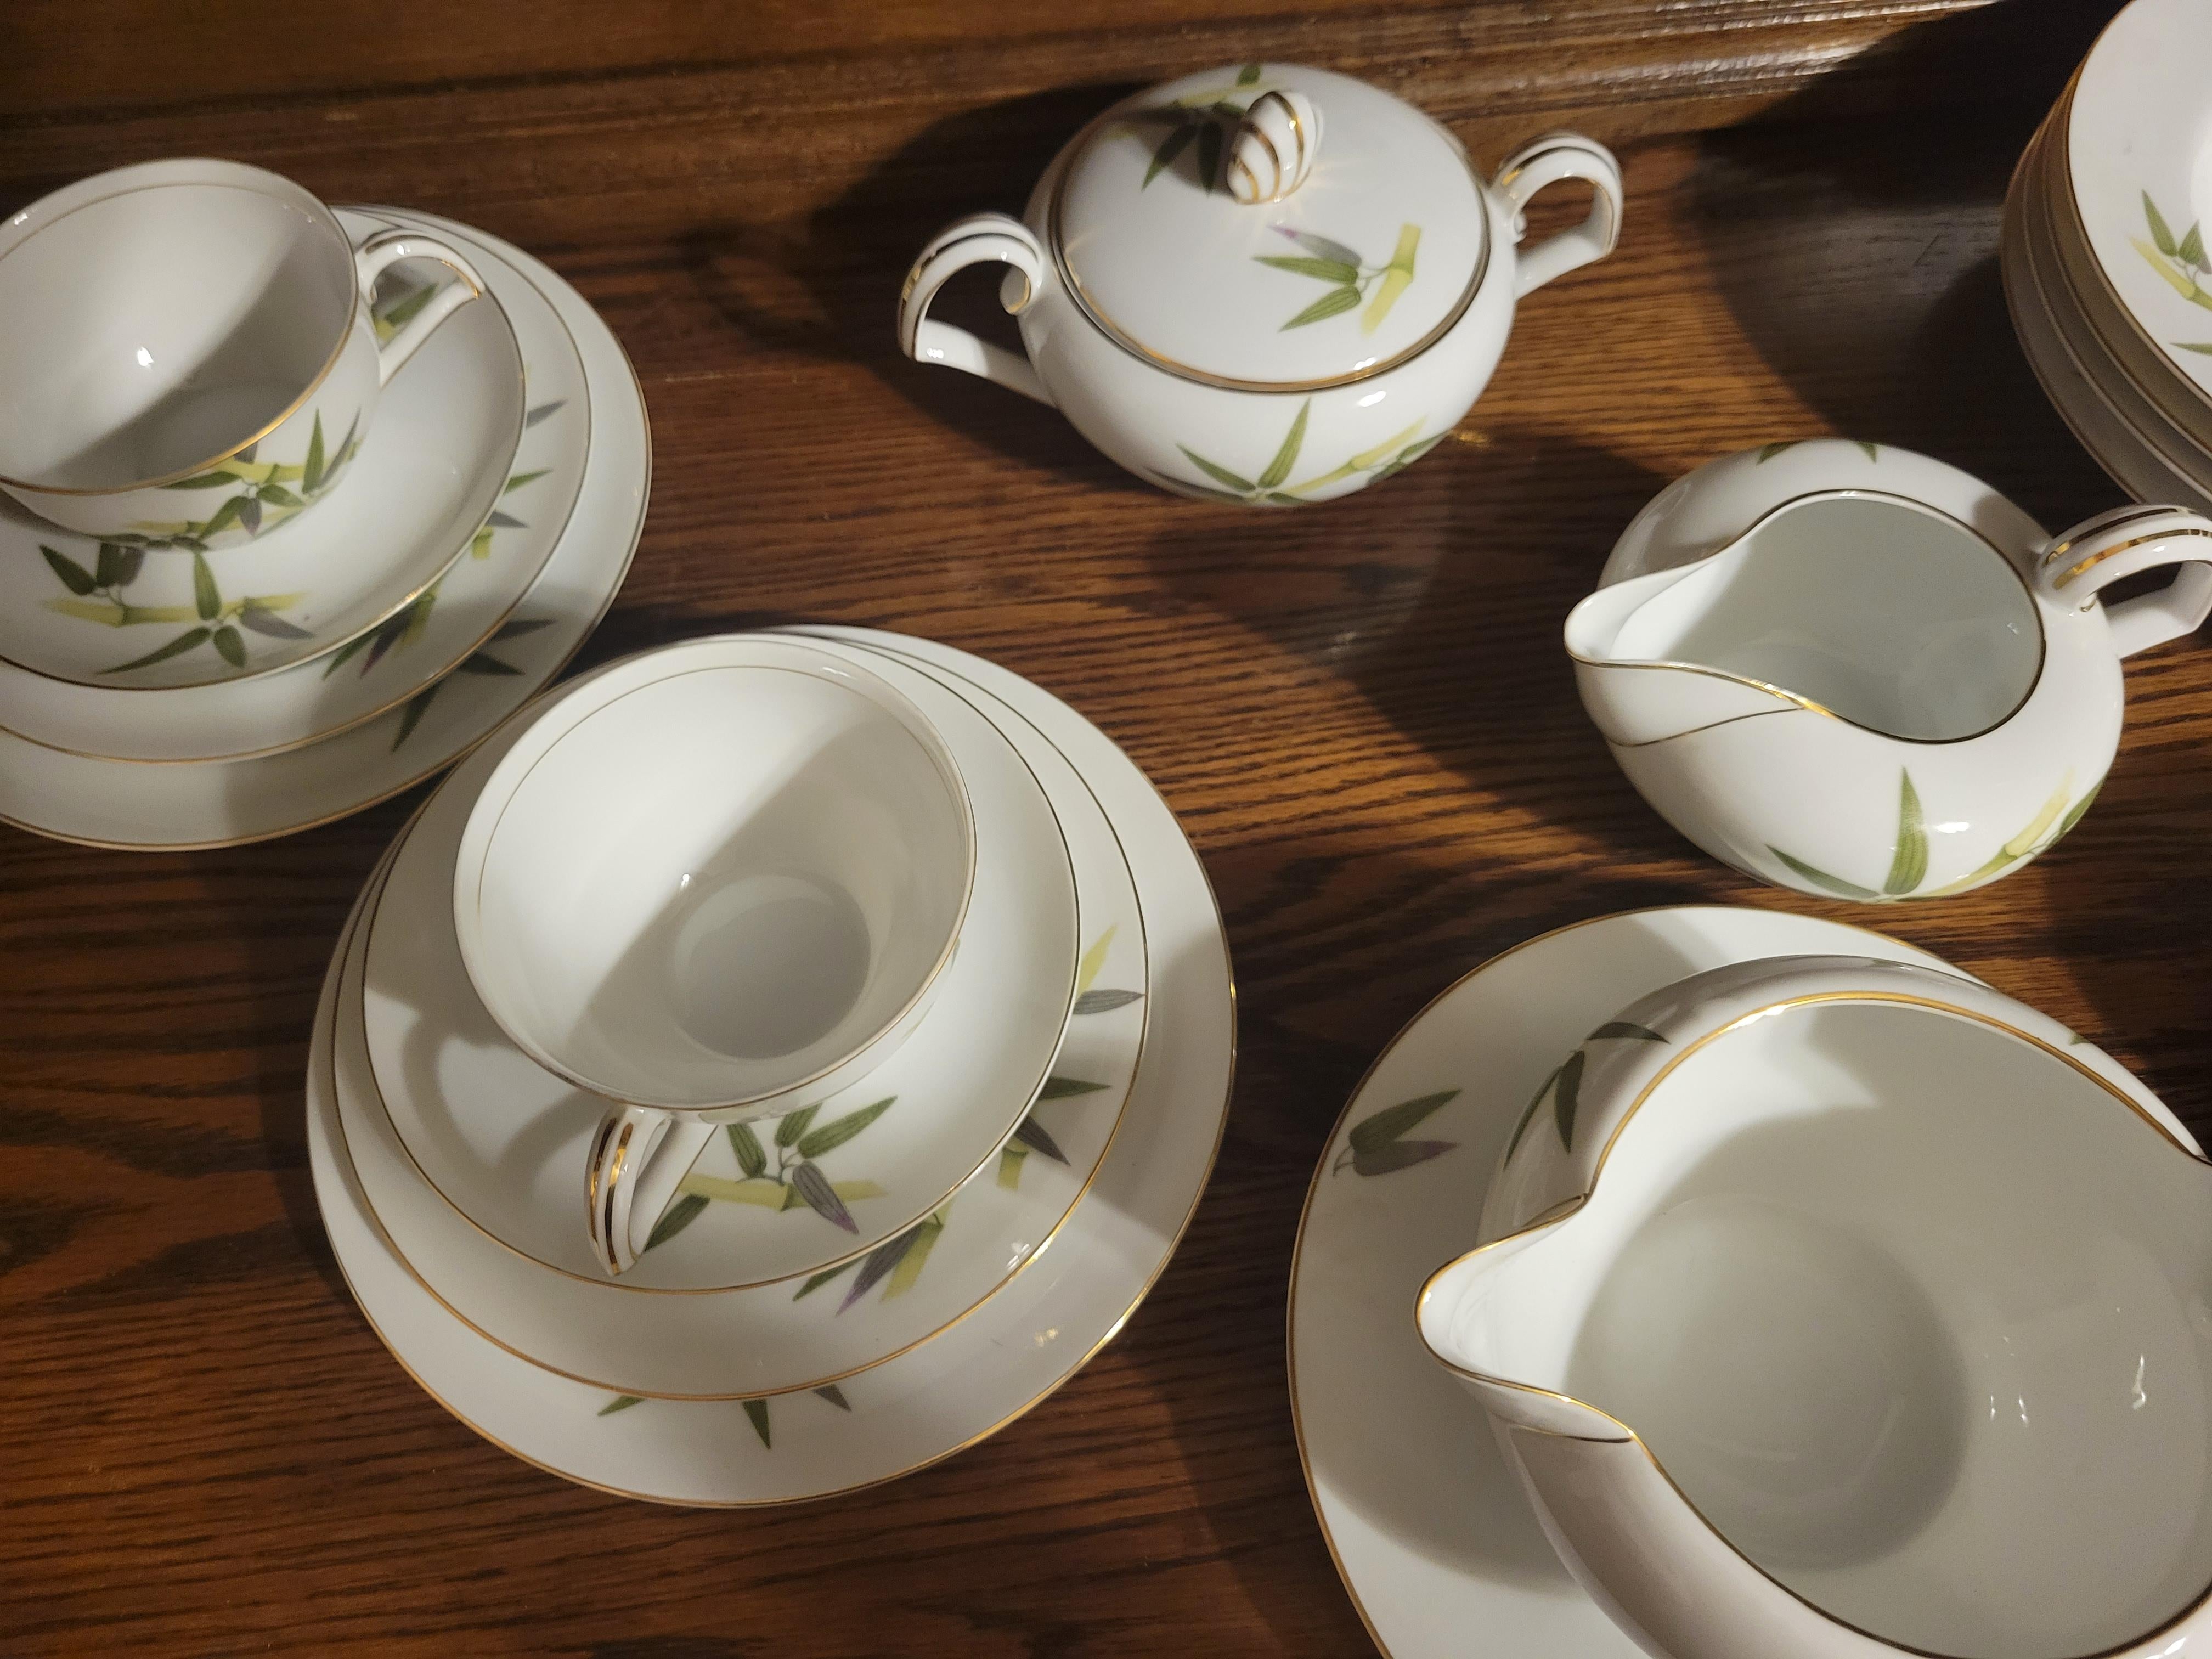 Japanese 1951 Narumi Japan 'Spring Bamboo' Fine China Set - 24 pieces plus replacements  For Sale